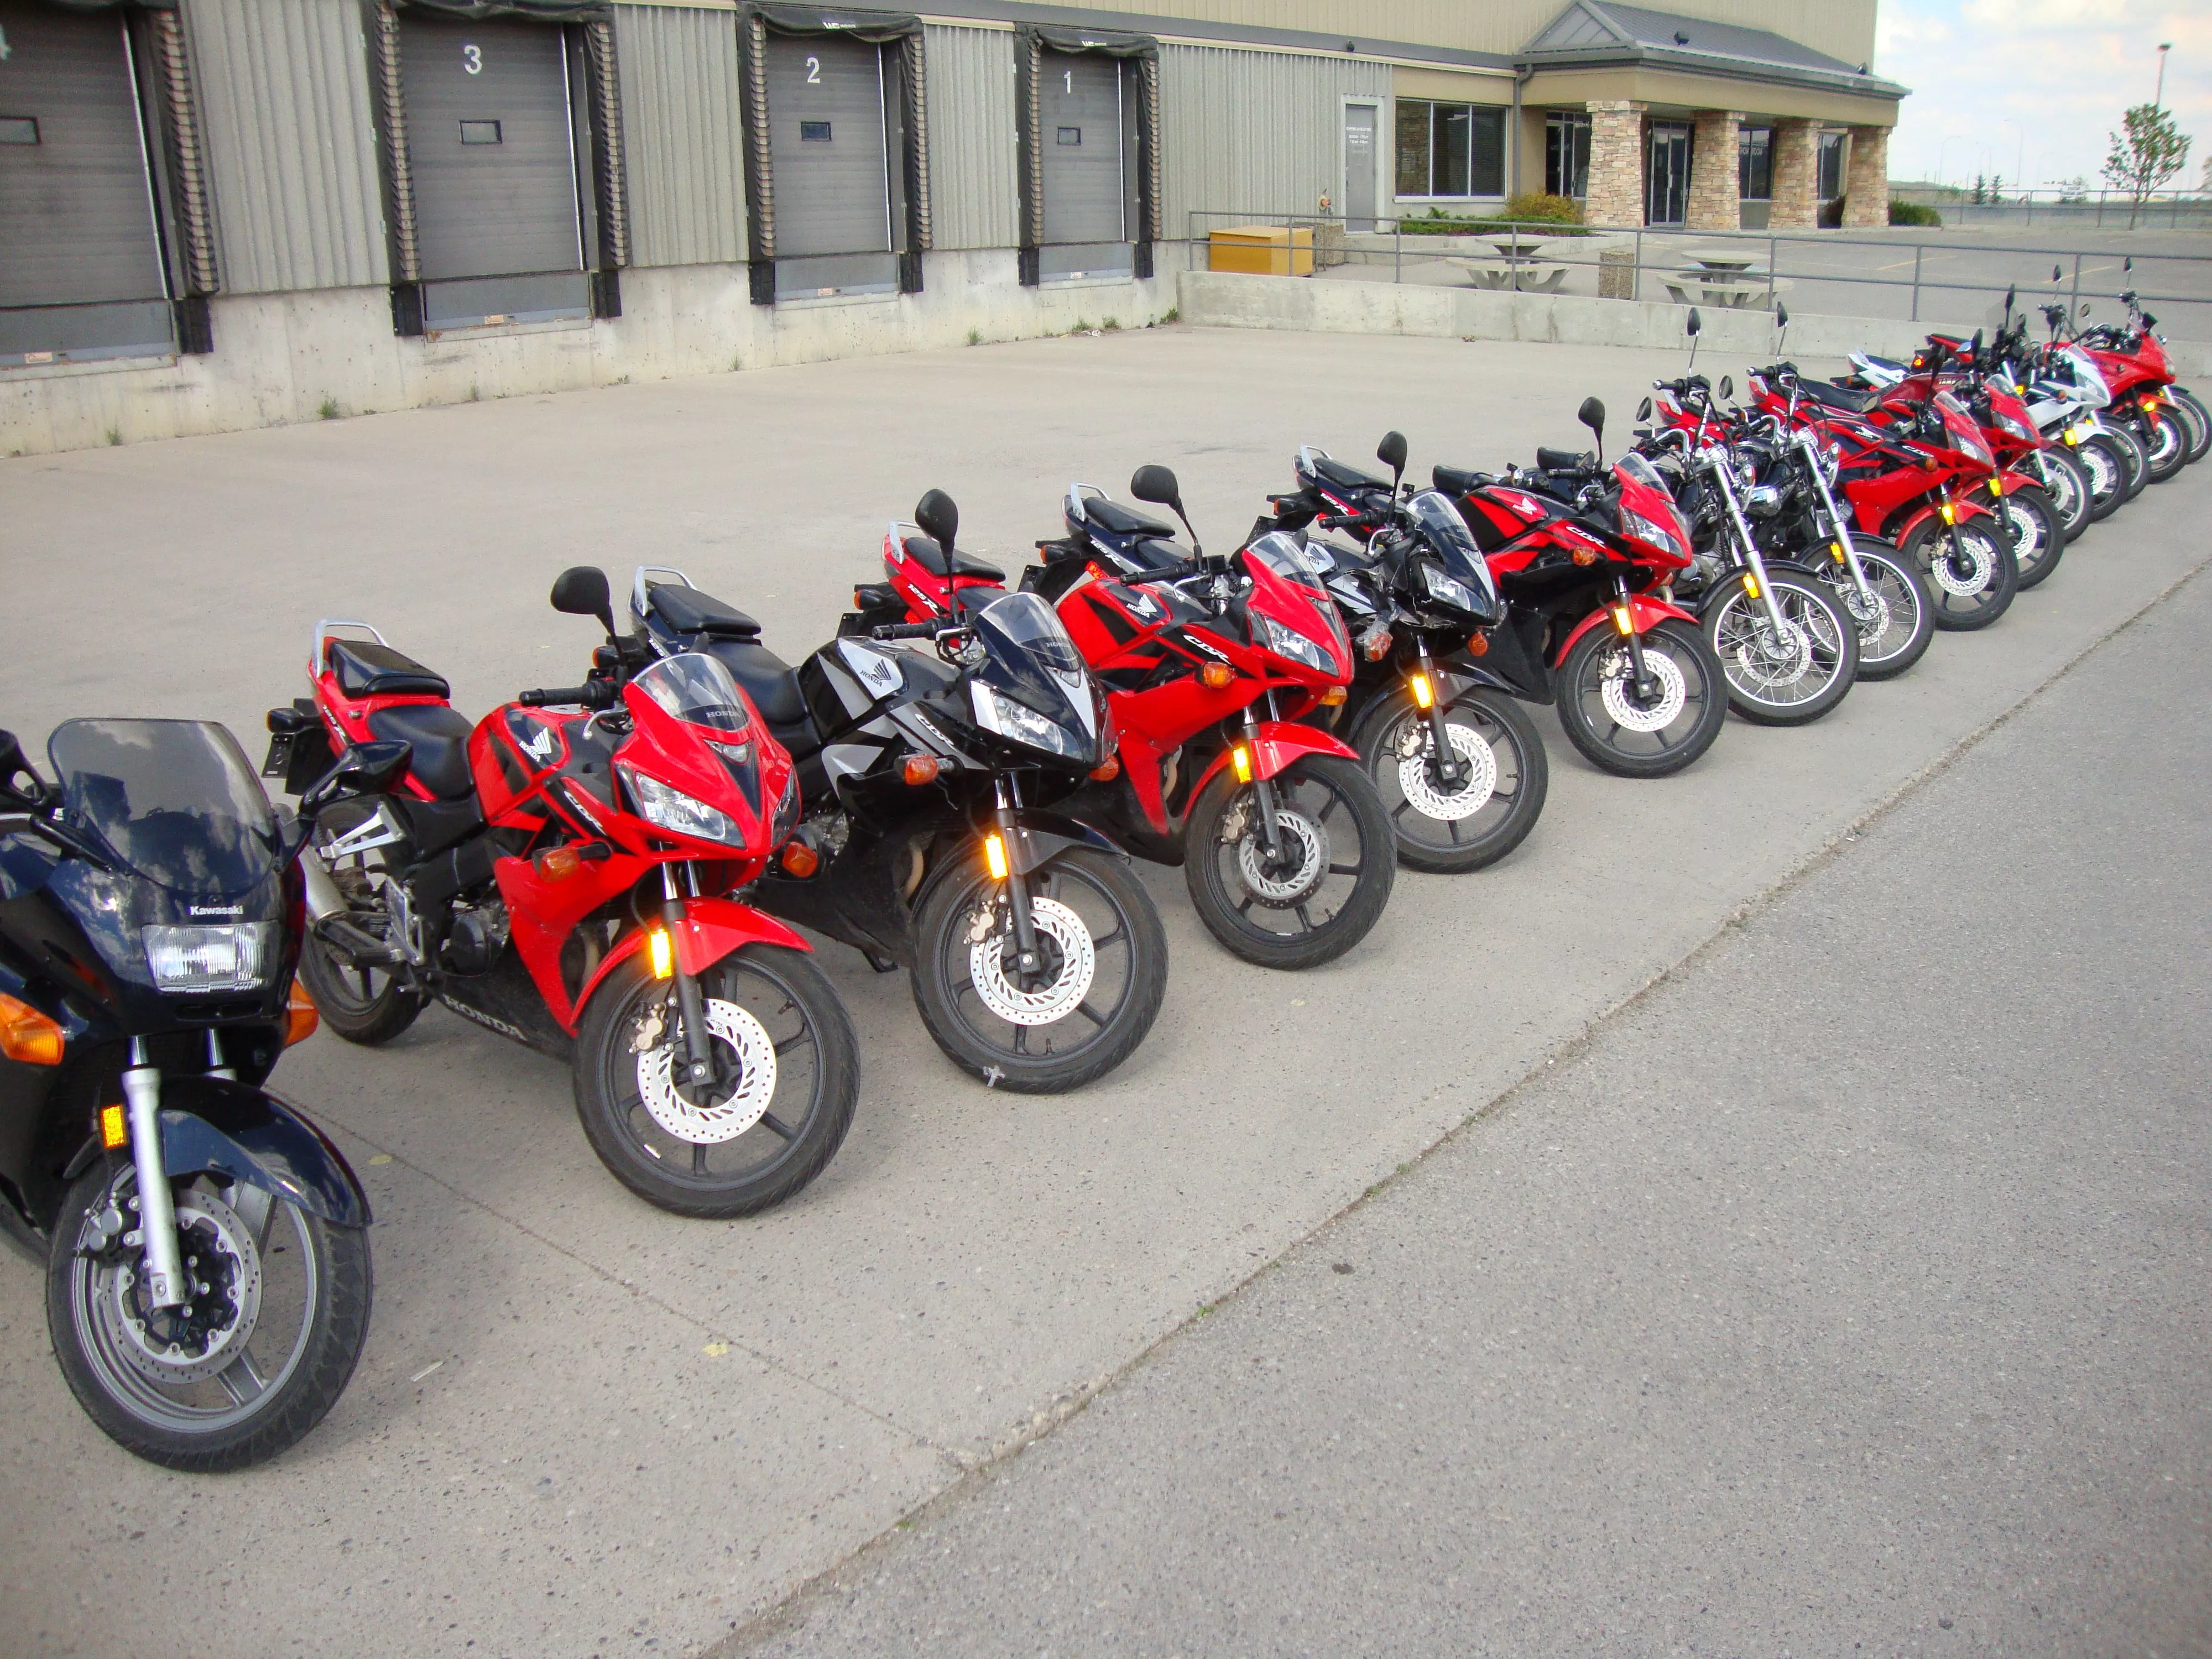 Stampede Driving School in Canada, North America | Motorcycles - Rated 0.9